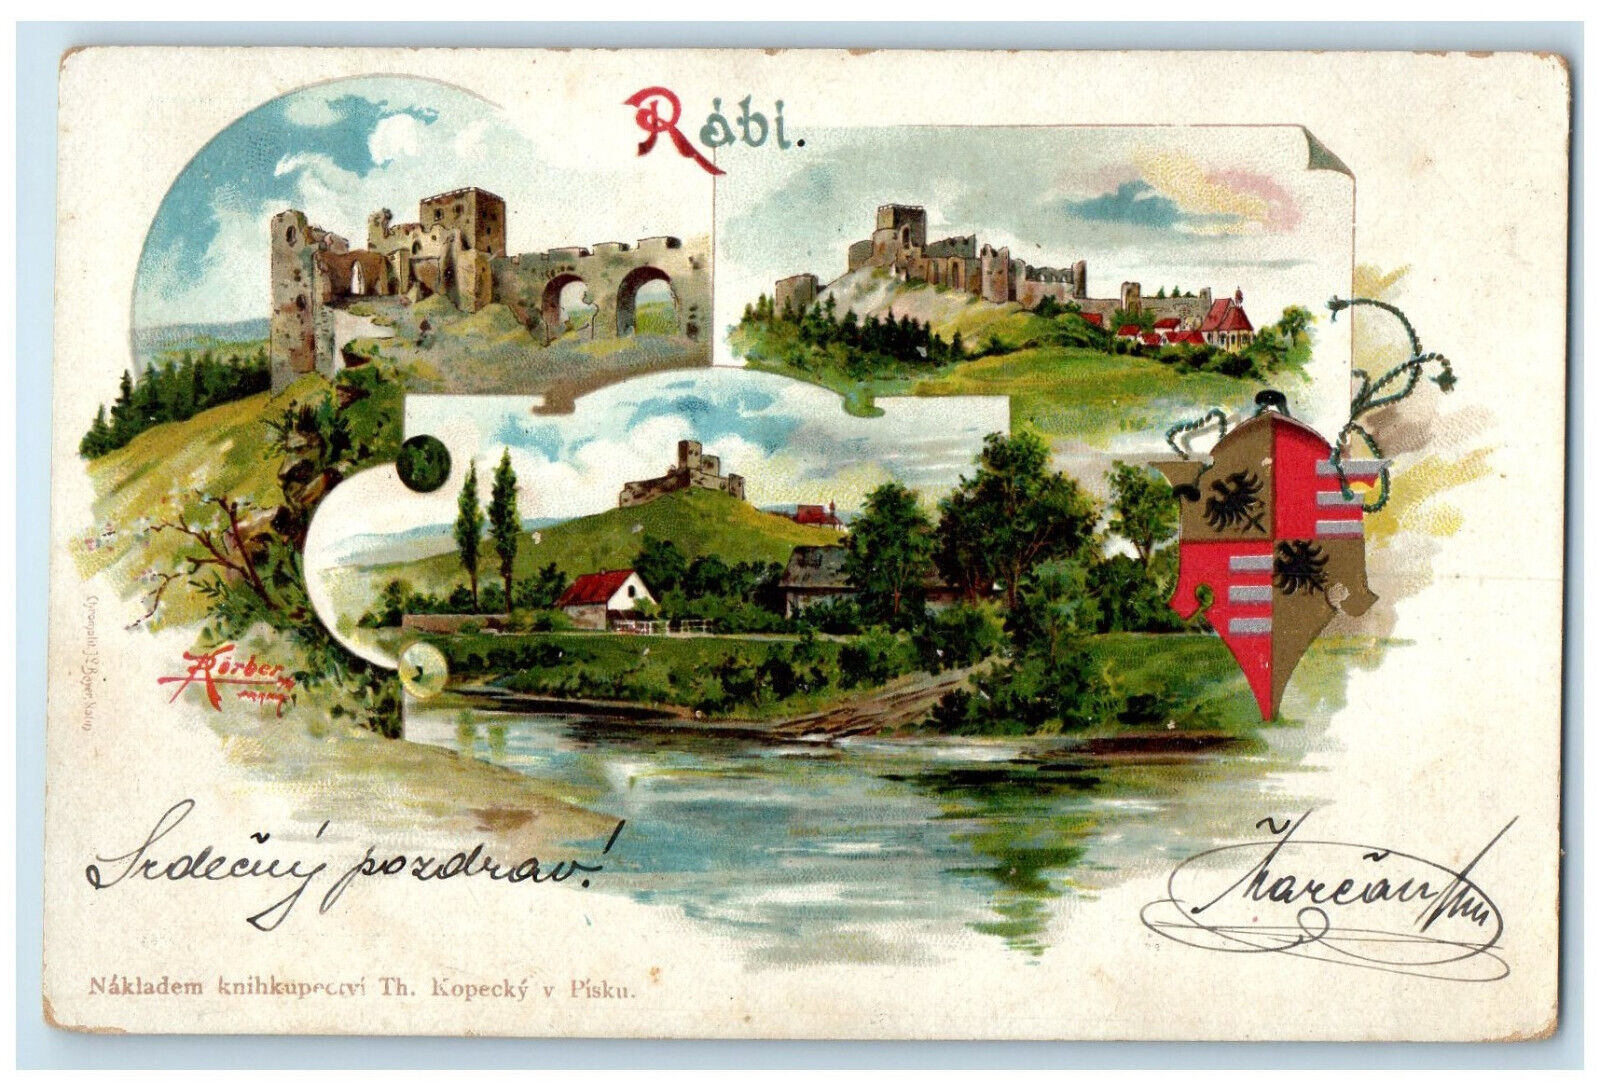 c1905 Warm Greetings from Rabi Multiview Antique Posted TH Kopecky Postcard